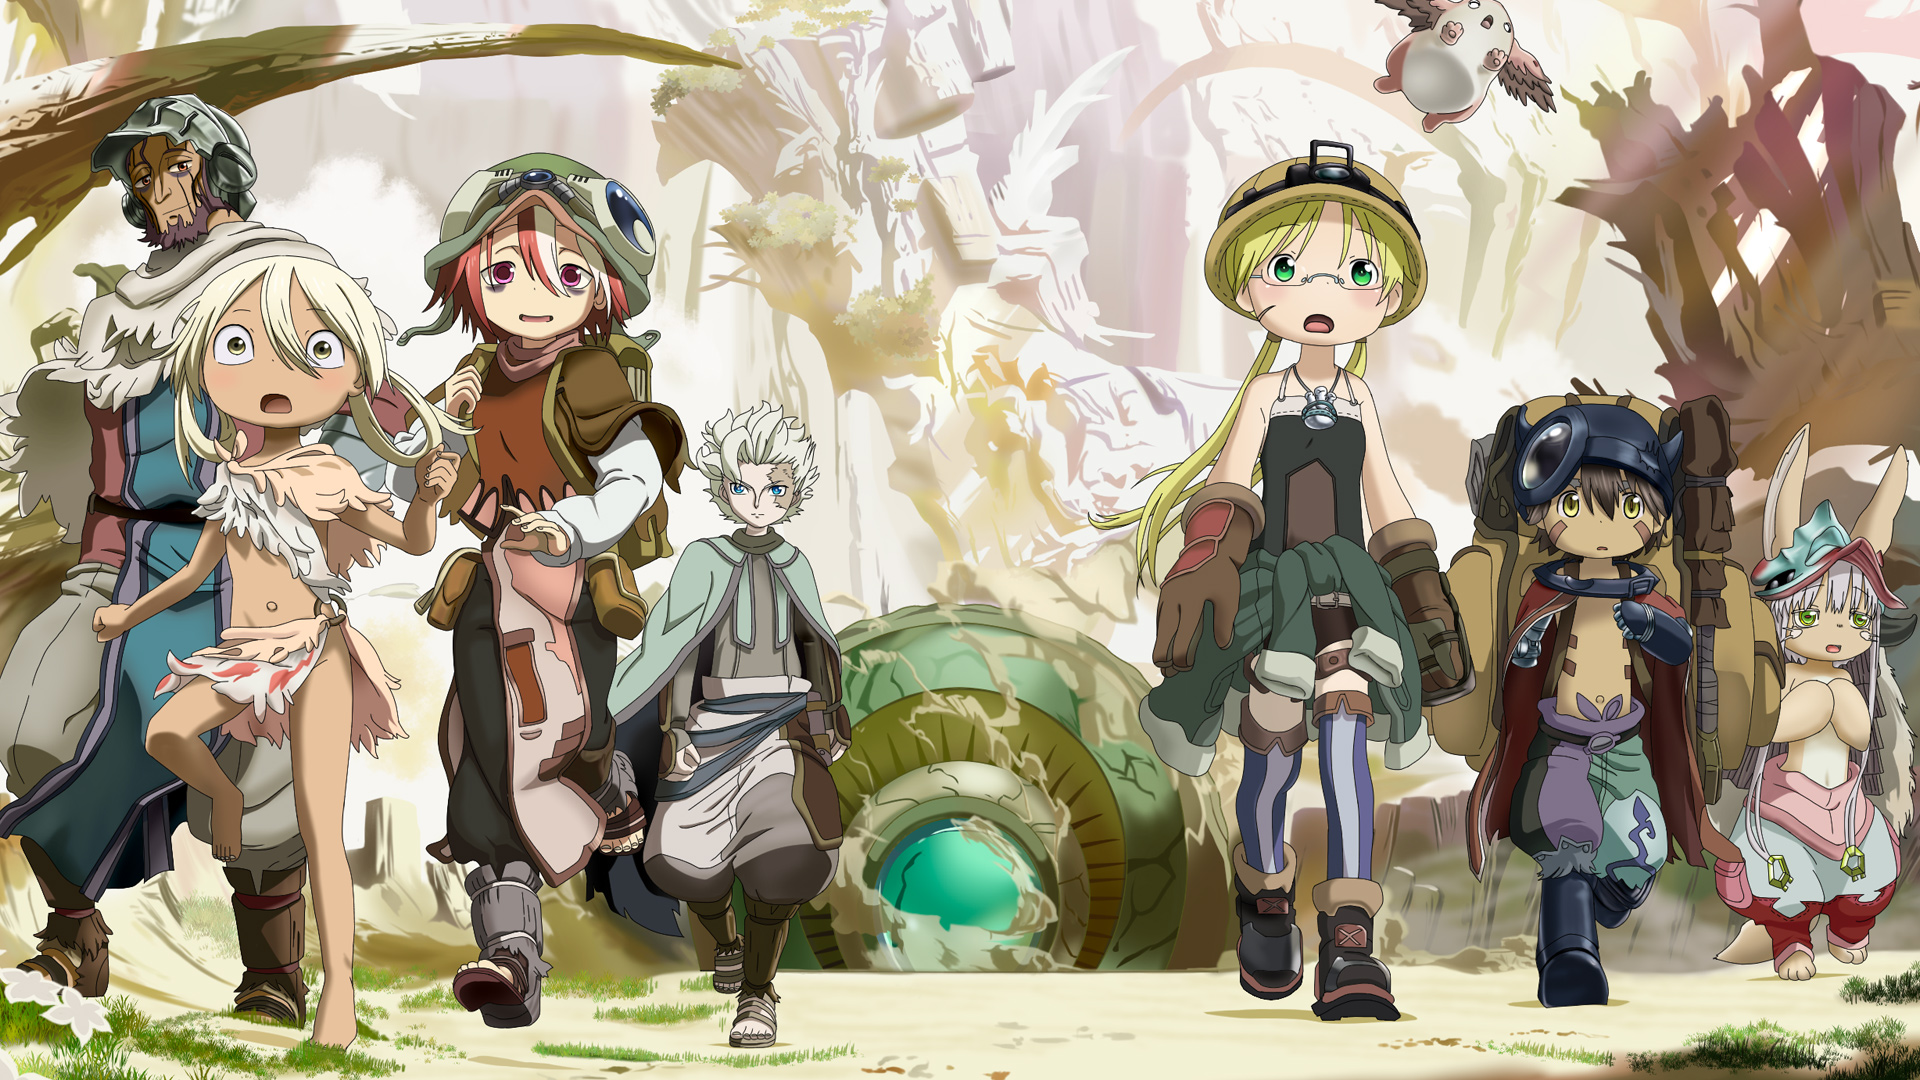 Made in Abyss Season 2 to Get Sequel!, Anime News